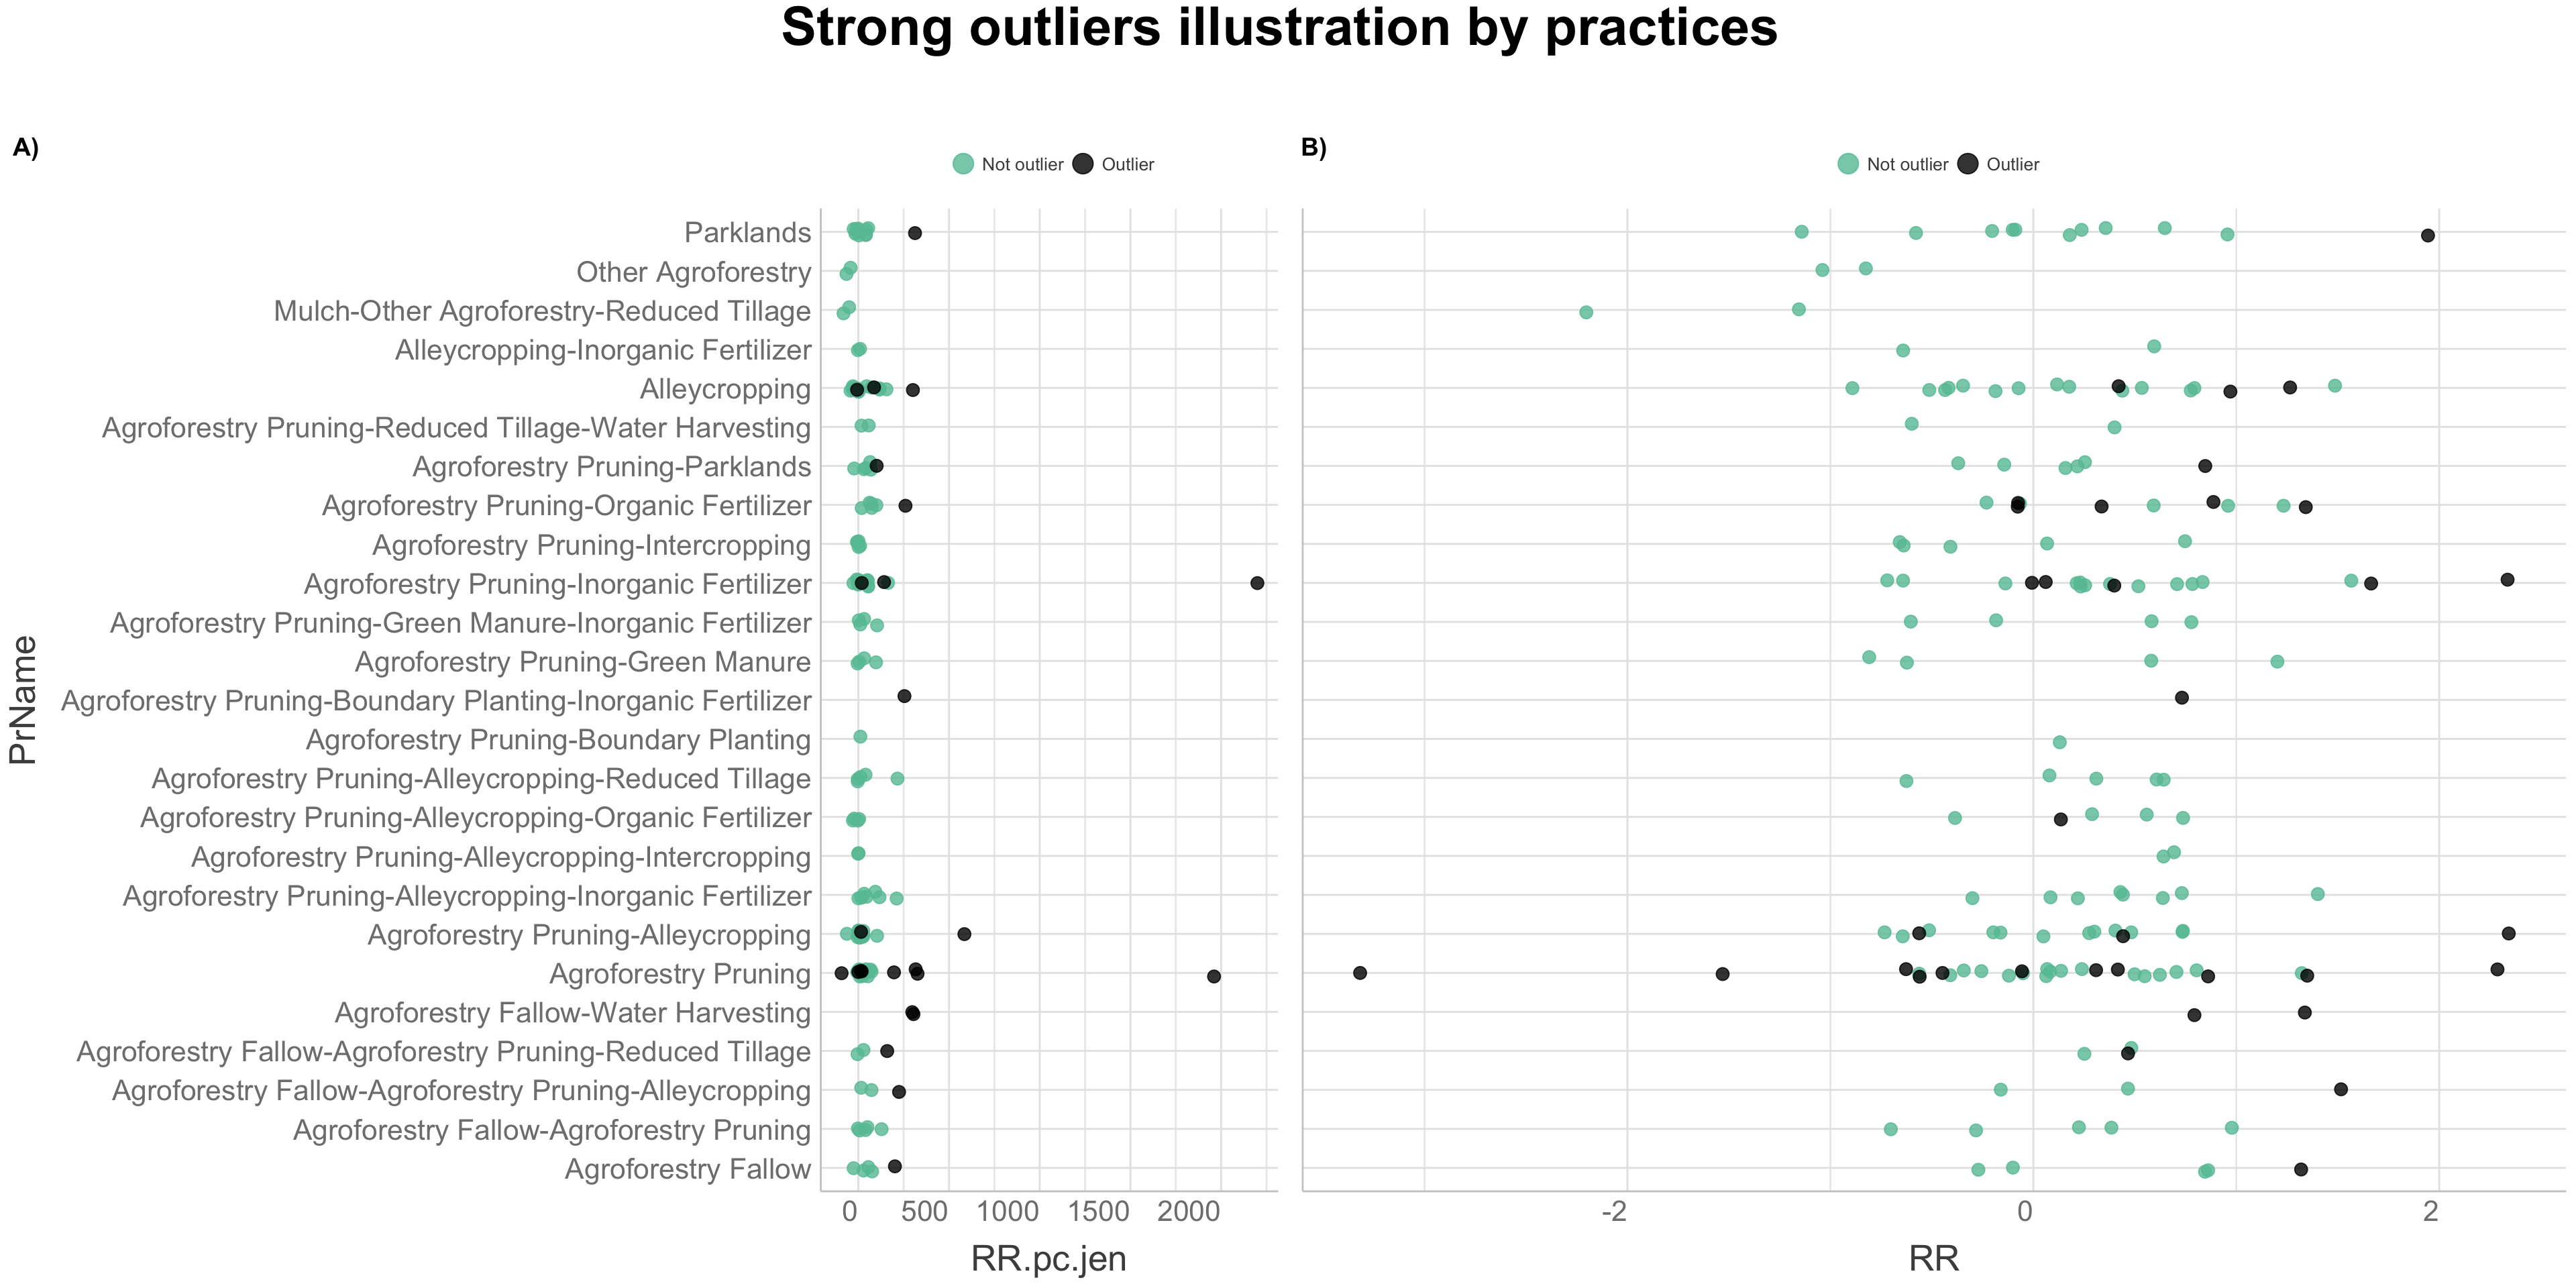 Strong outliers illustration by practices